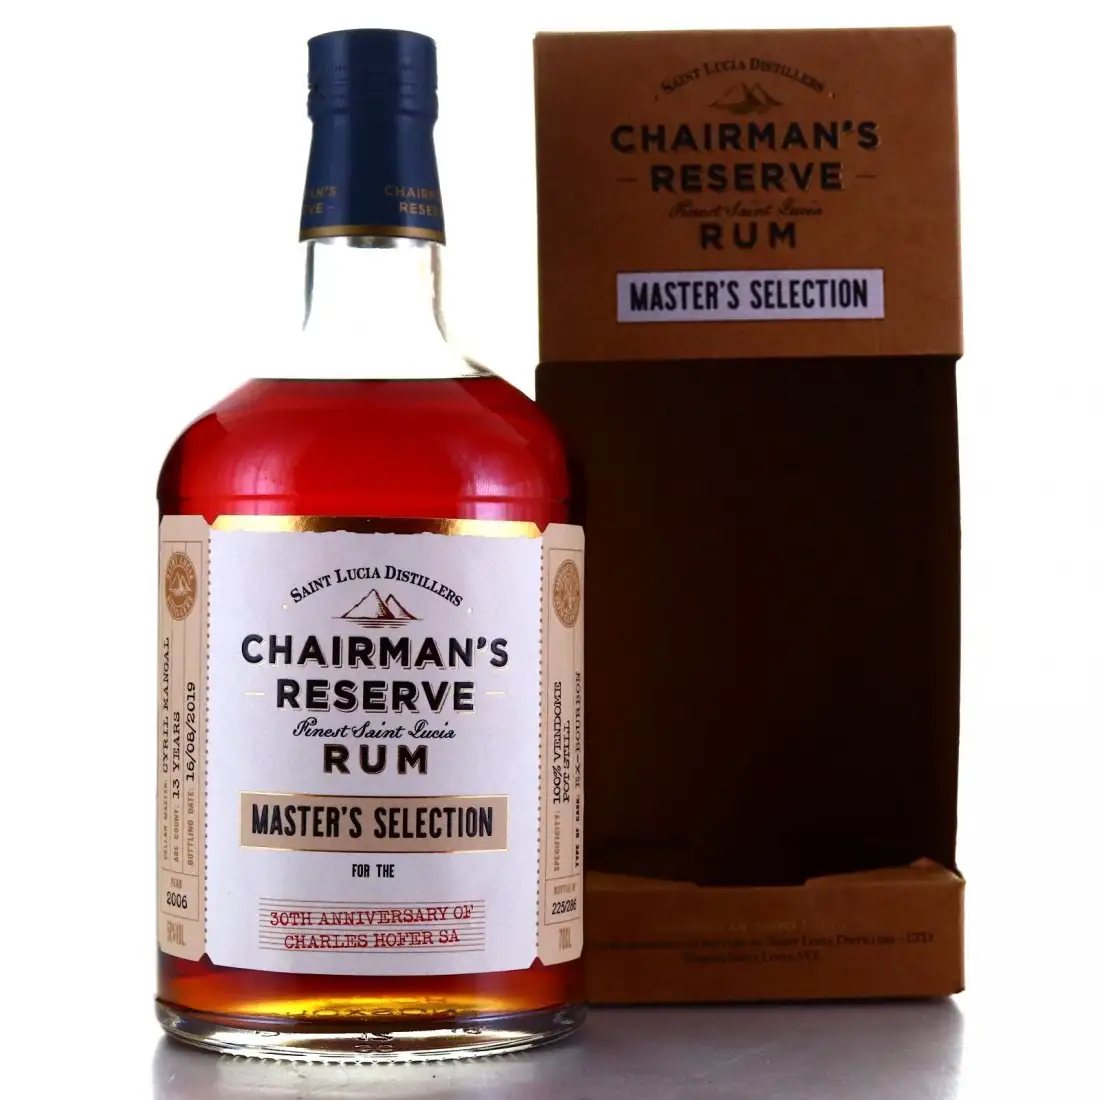 Image of the front of the bottle of the rum Chairman‘s Reserve Master's Selection 30th Anniversary of Charles Hofer